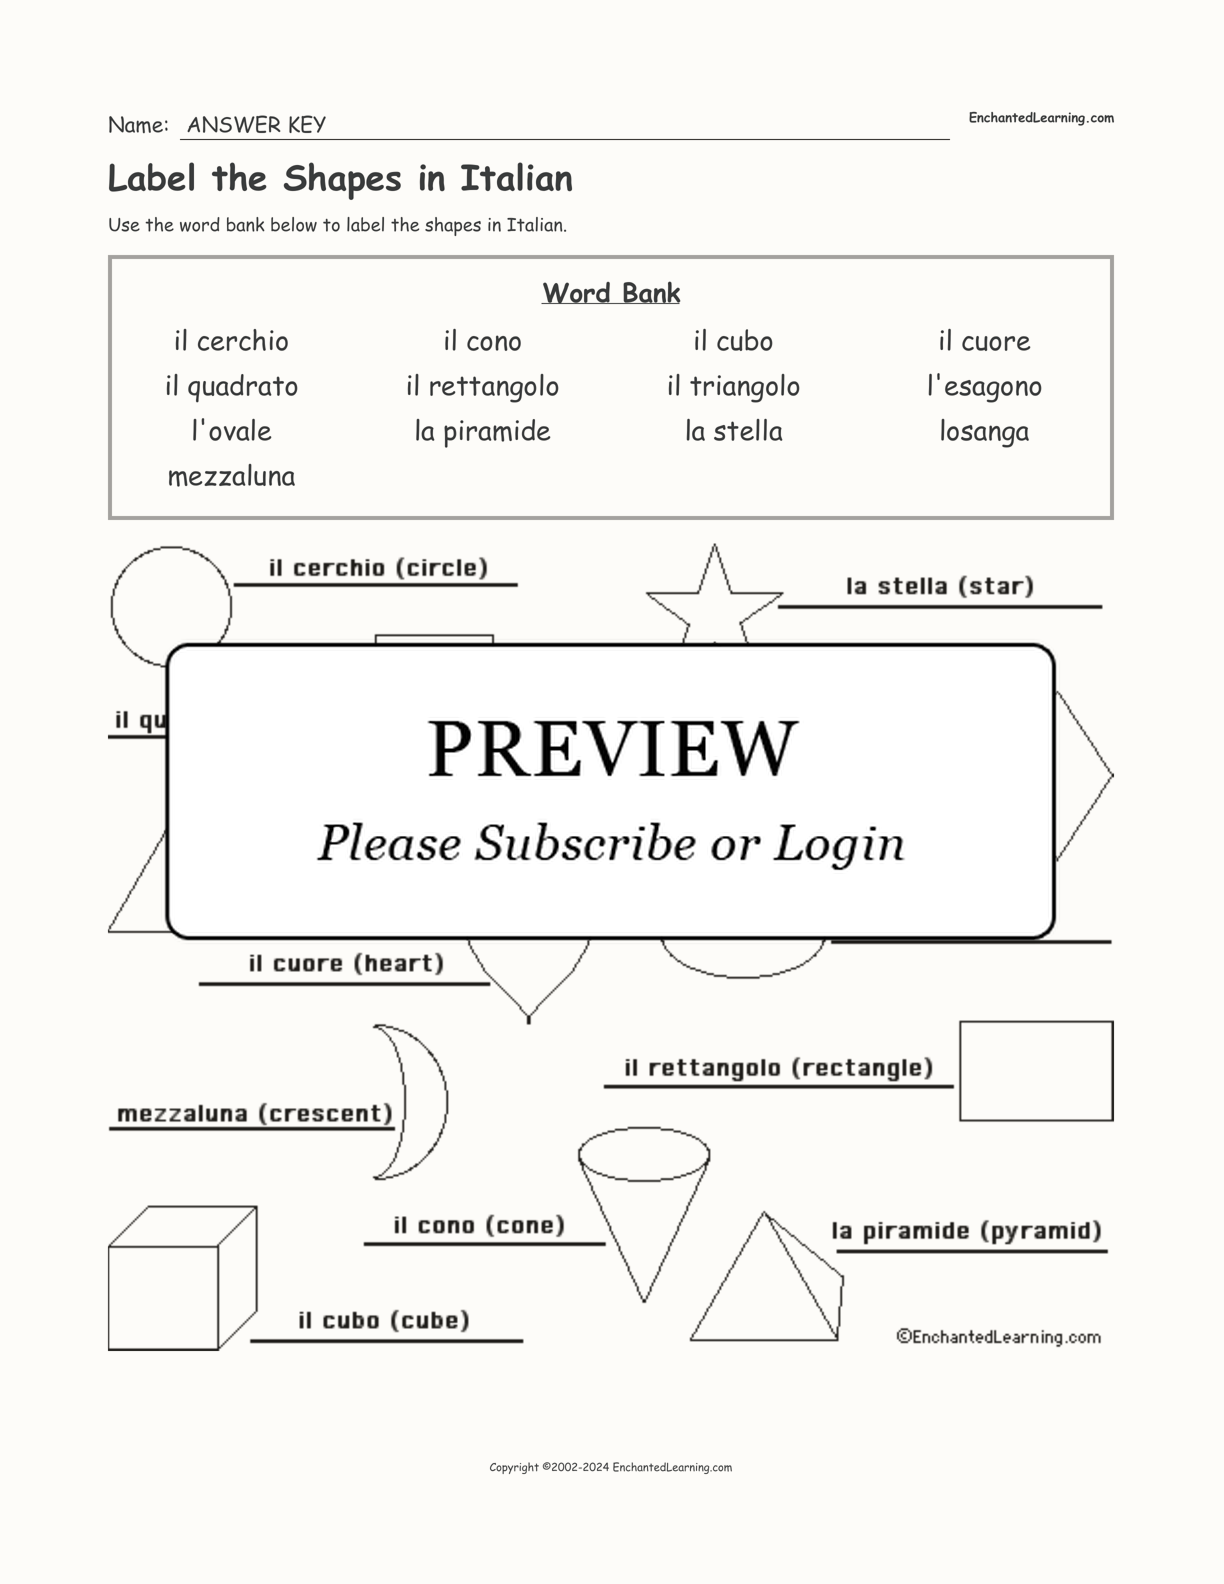 Label the Shapes in Italian interactive worksheet page 2